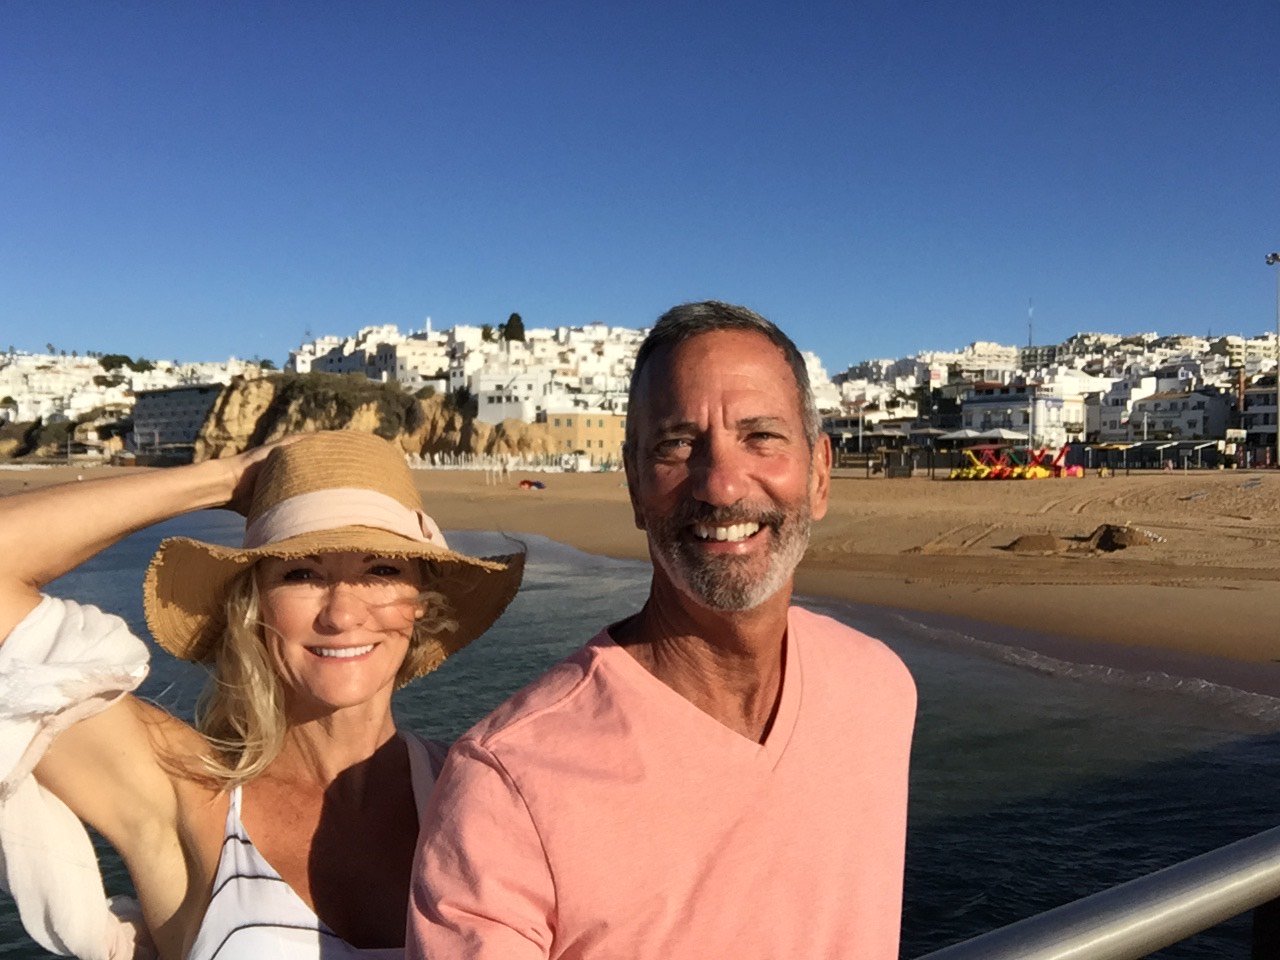 Jim and Kelly Leland bought and renovated a home in Portugal.